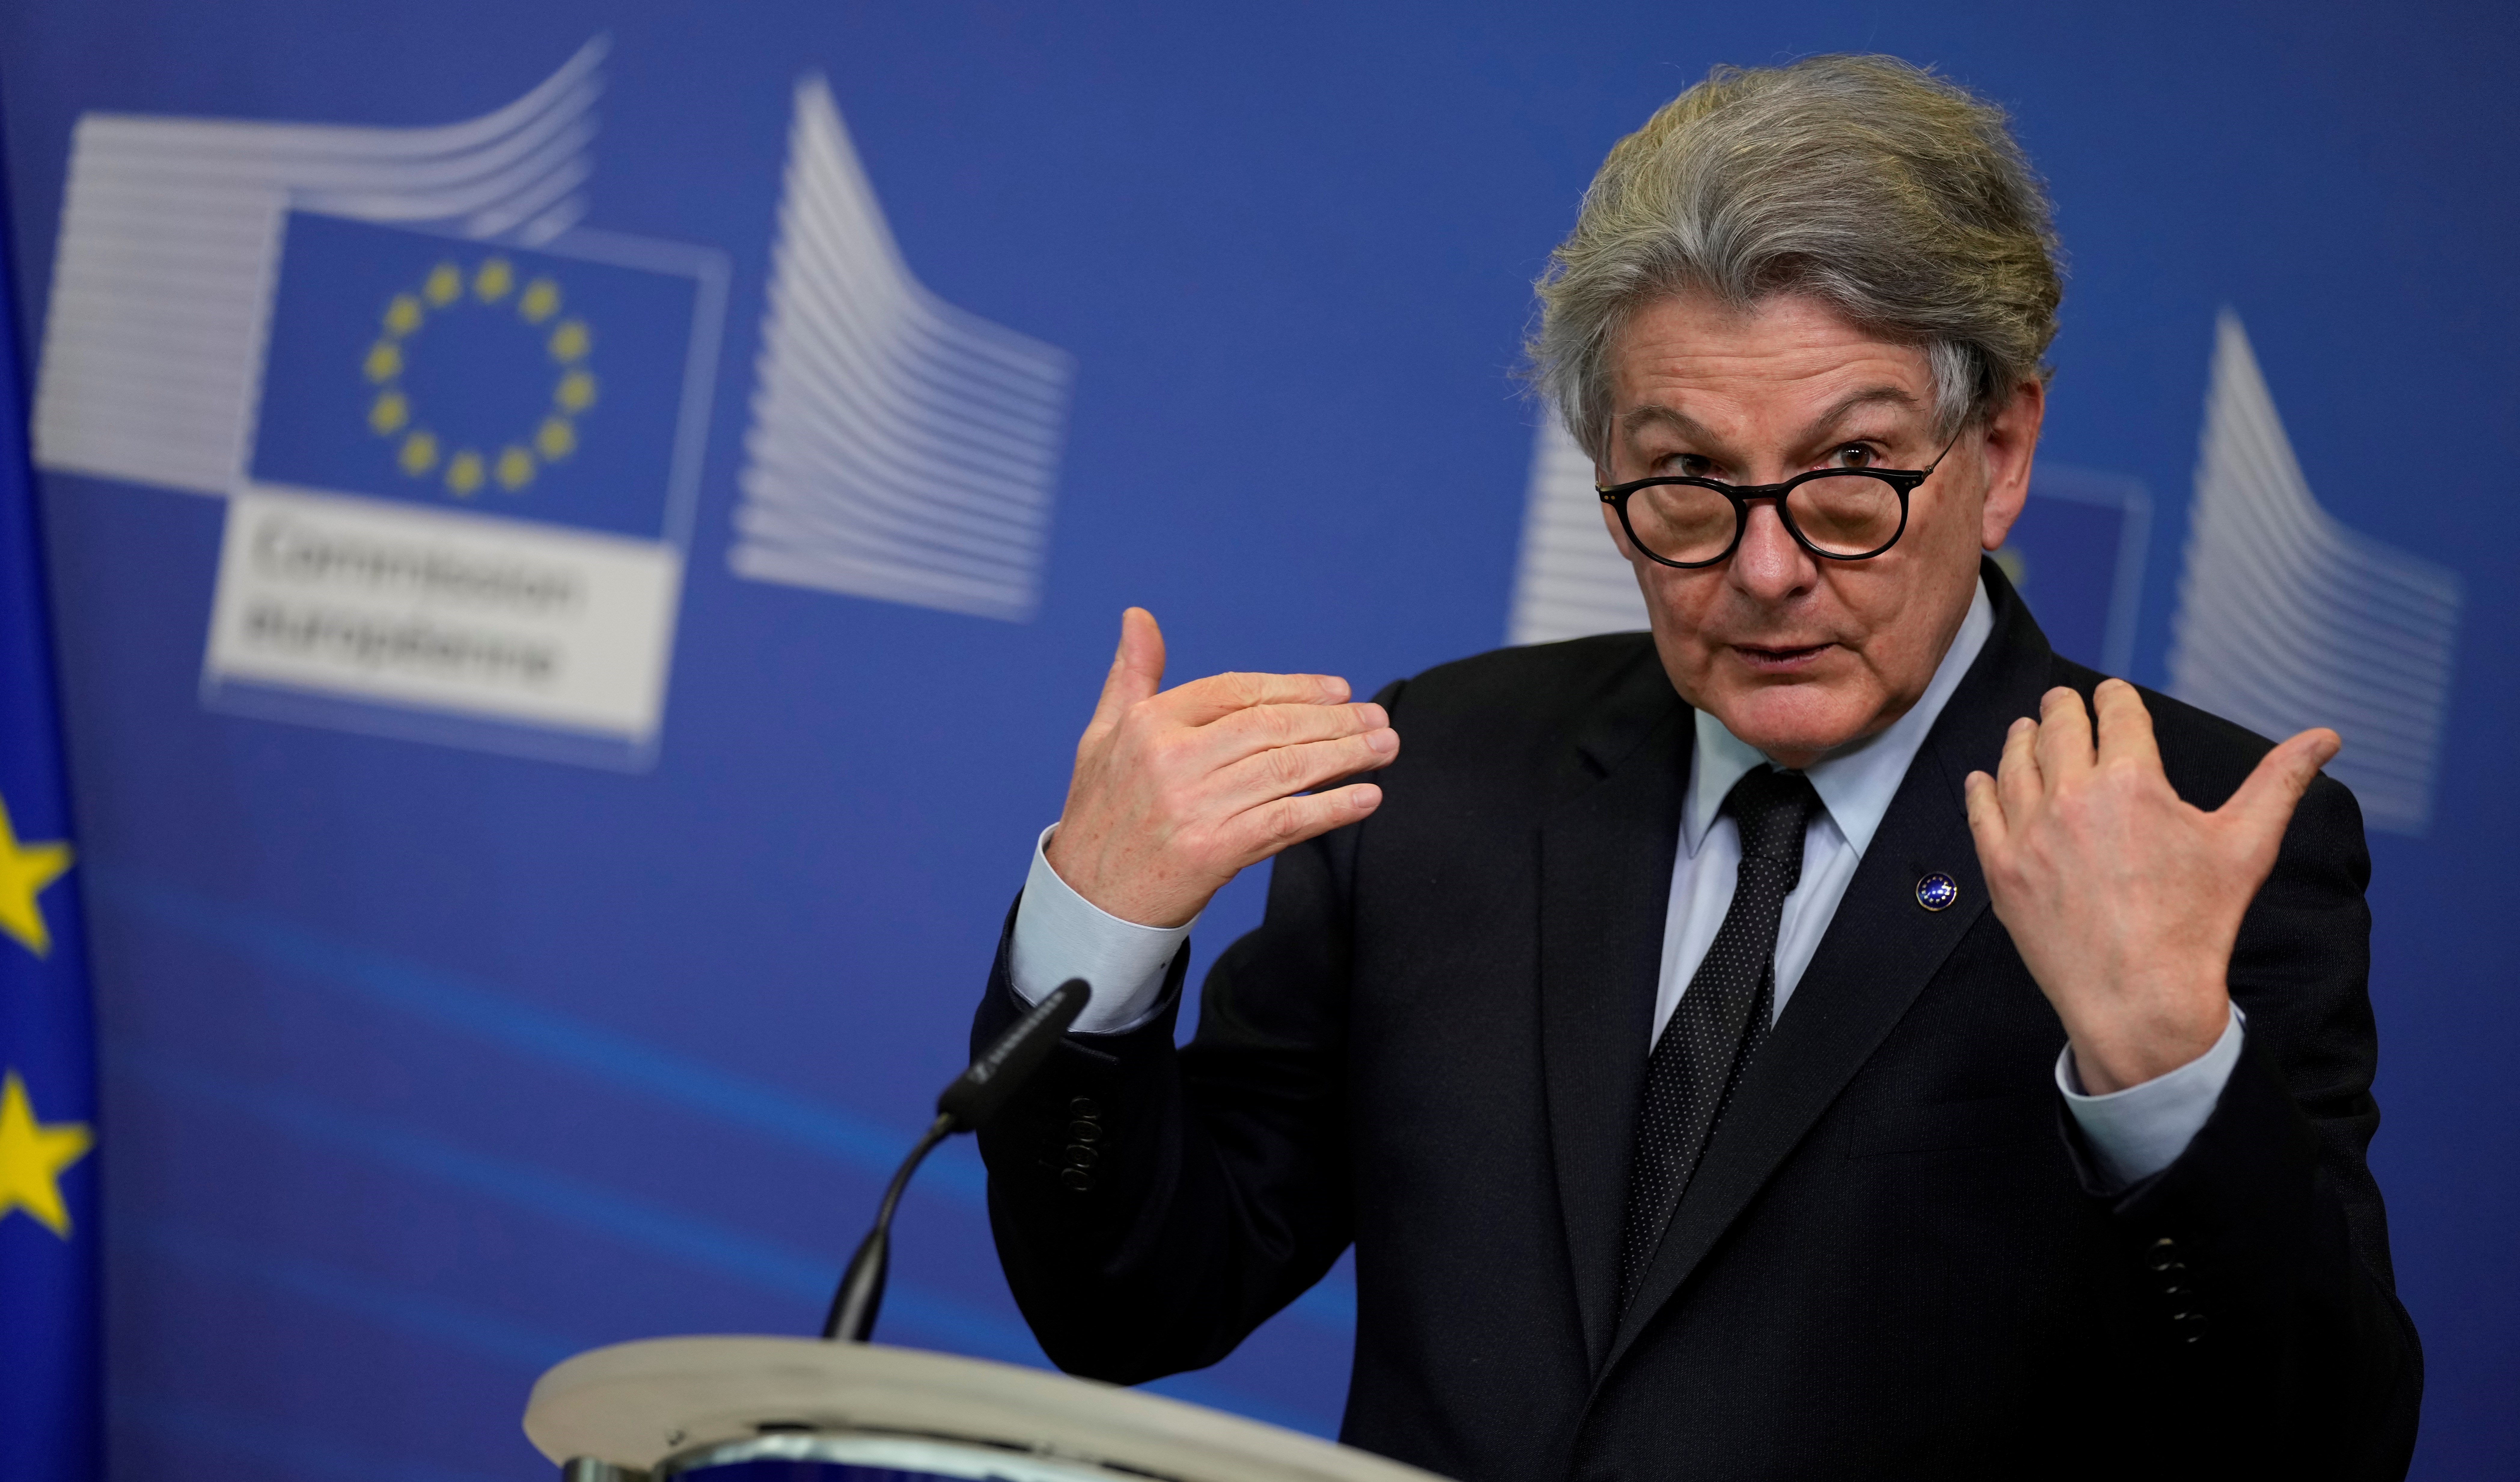 European Commissioner for Internal Market Thierry Breton speaks during a signature ceremony regarding the Chips Act at EU headquarters in Brussels, on February 8, 2022 (AP).